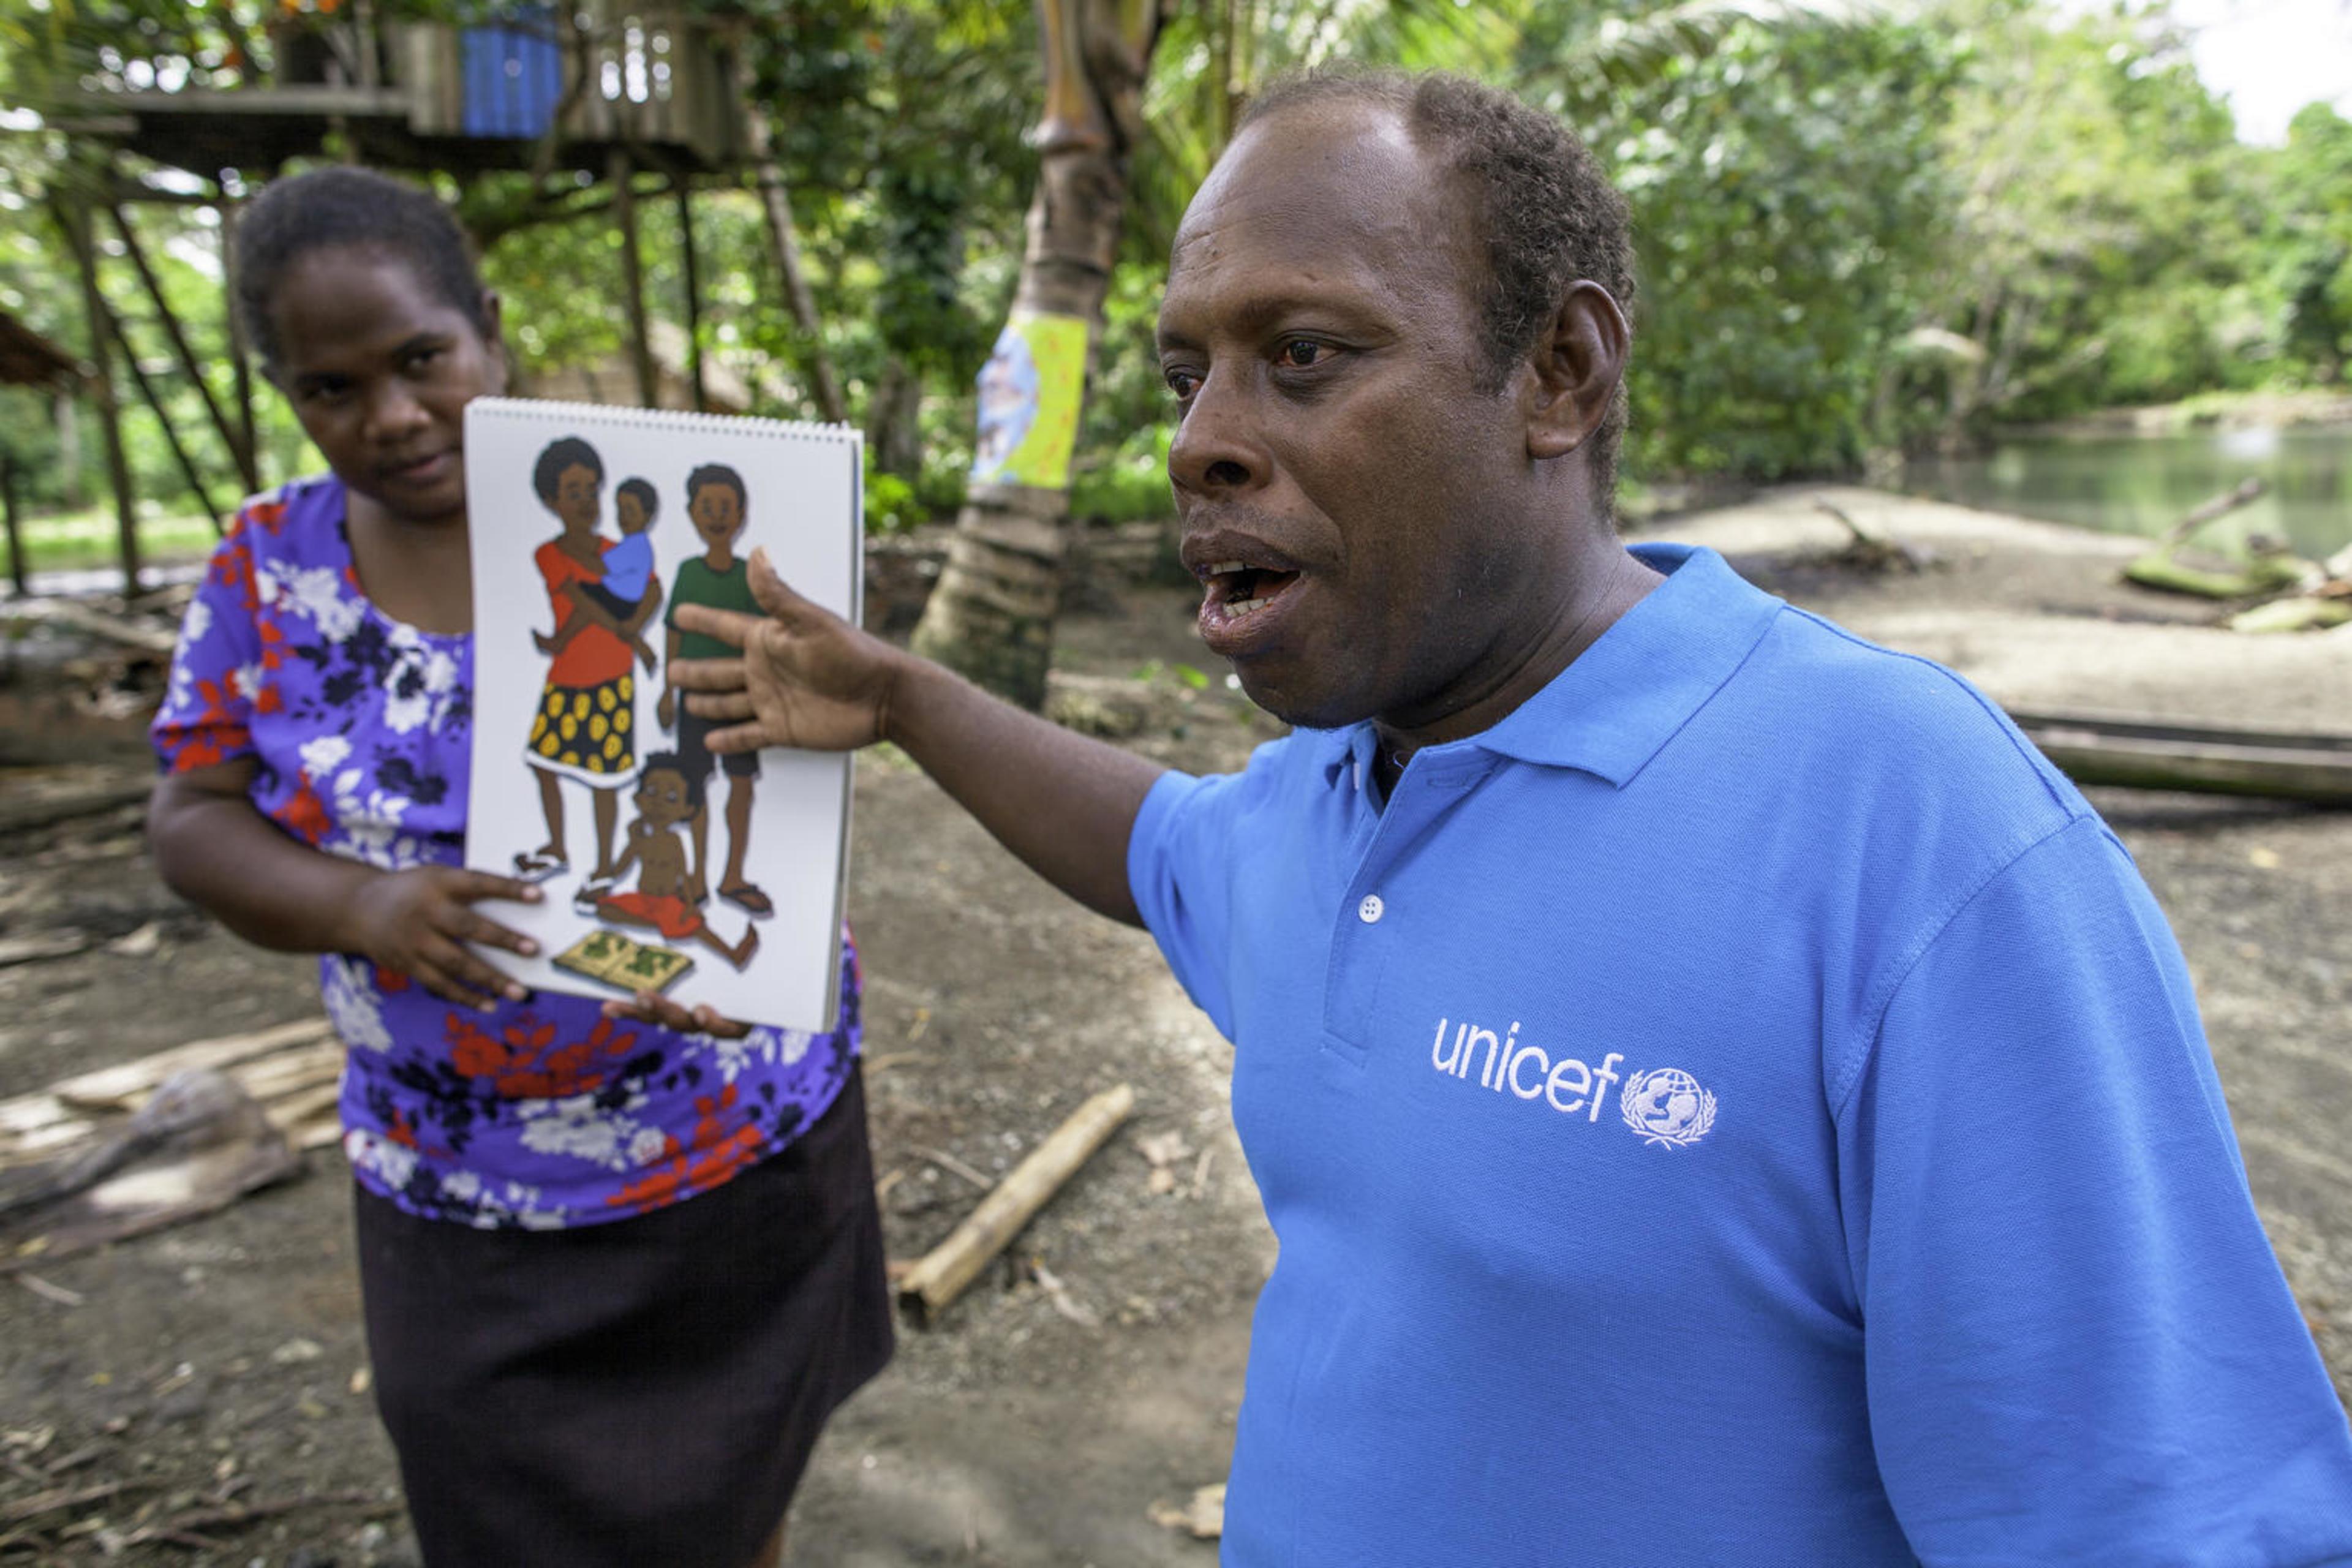 UNICEF Health Worker Paul Maesiala advises mothers and educates families on the importance of a nutritious diet